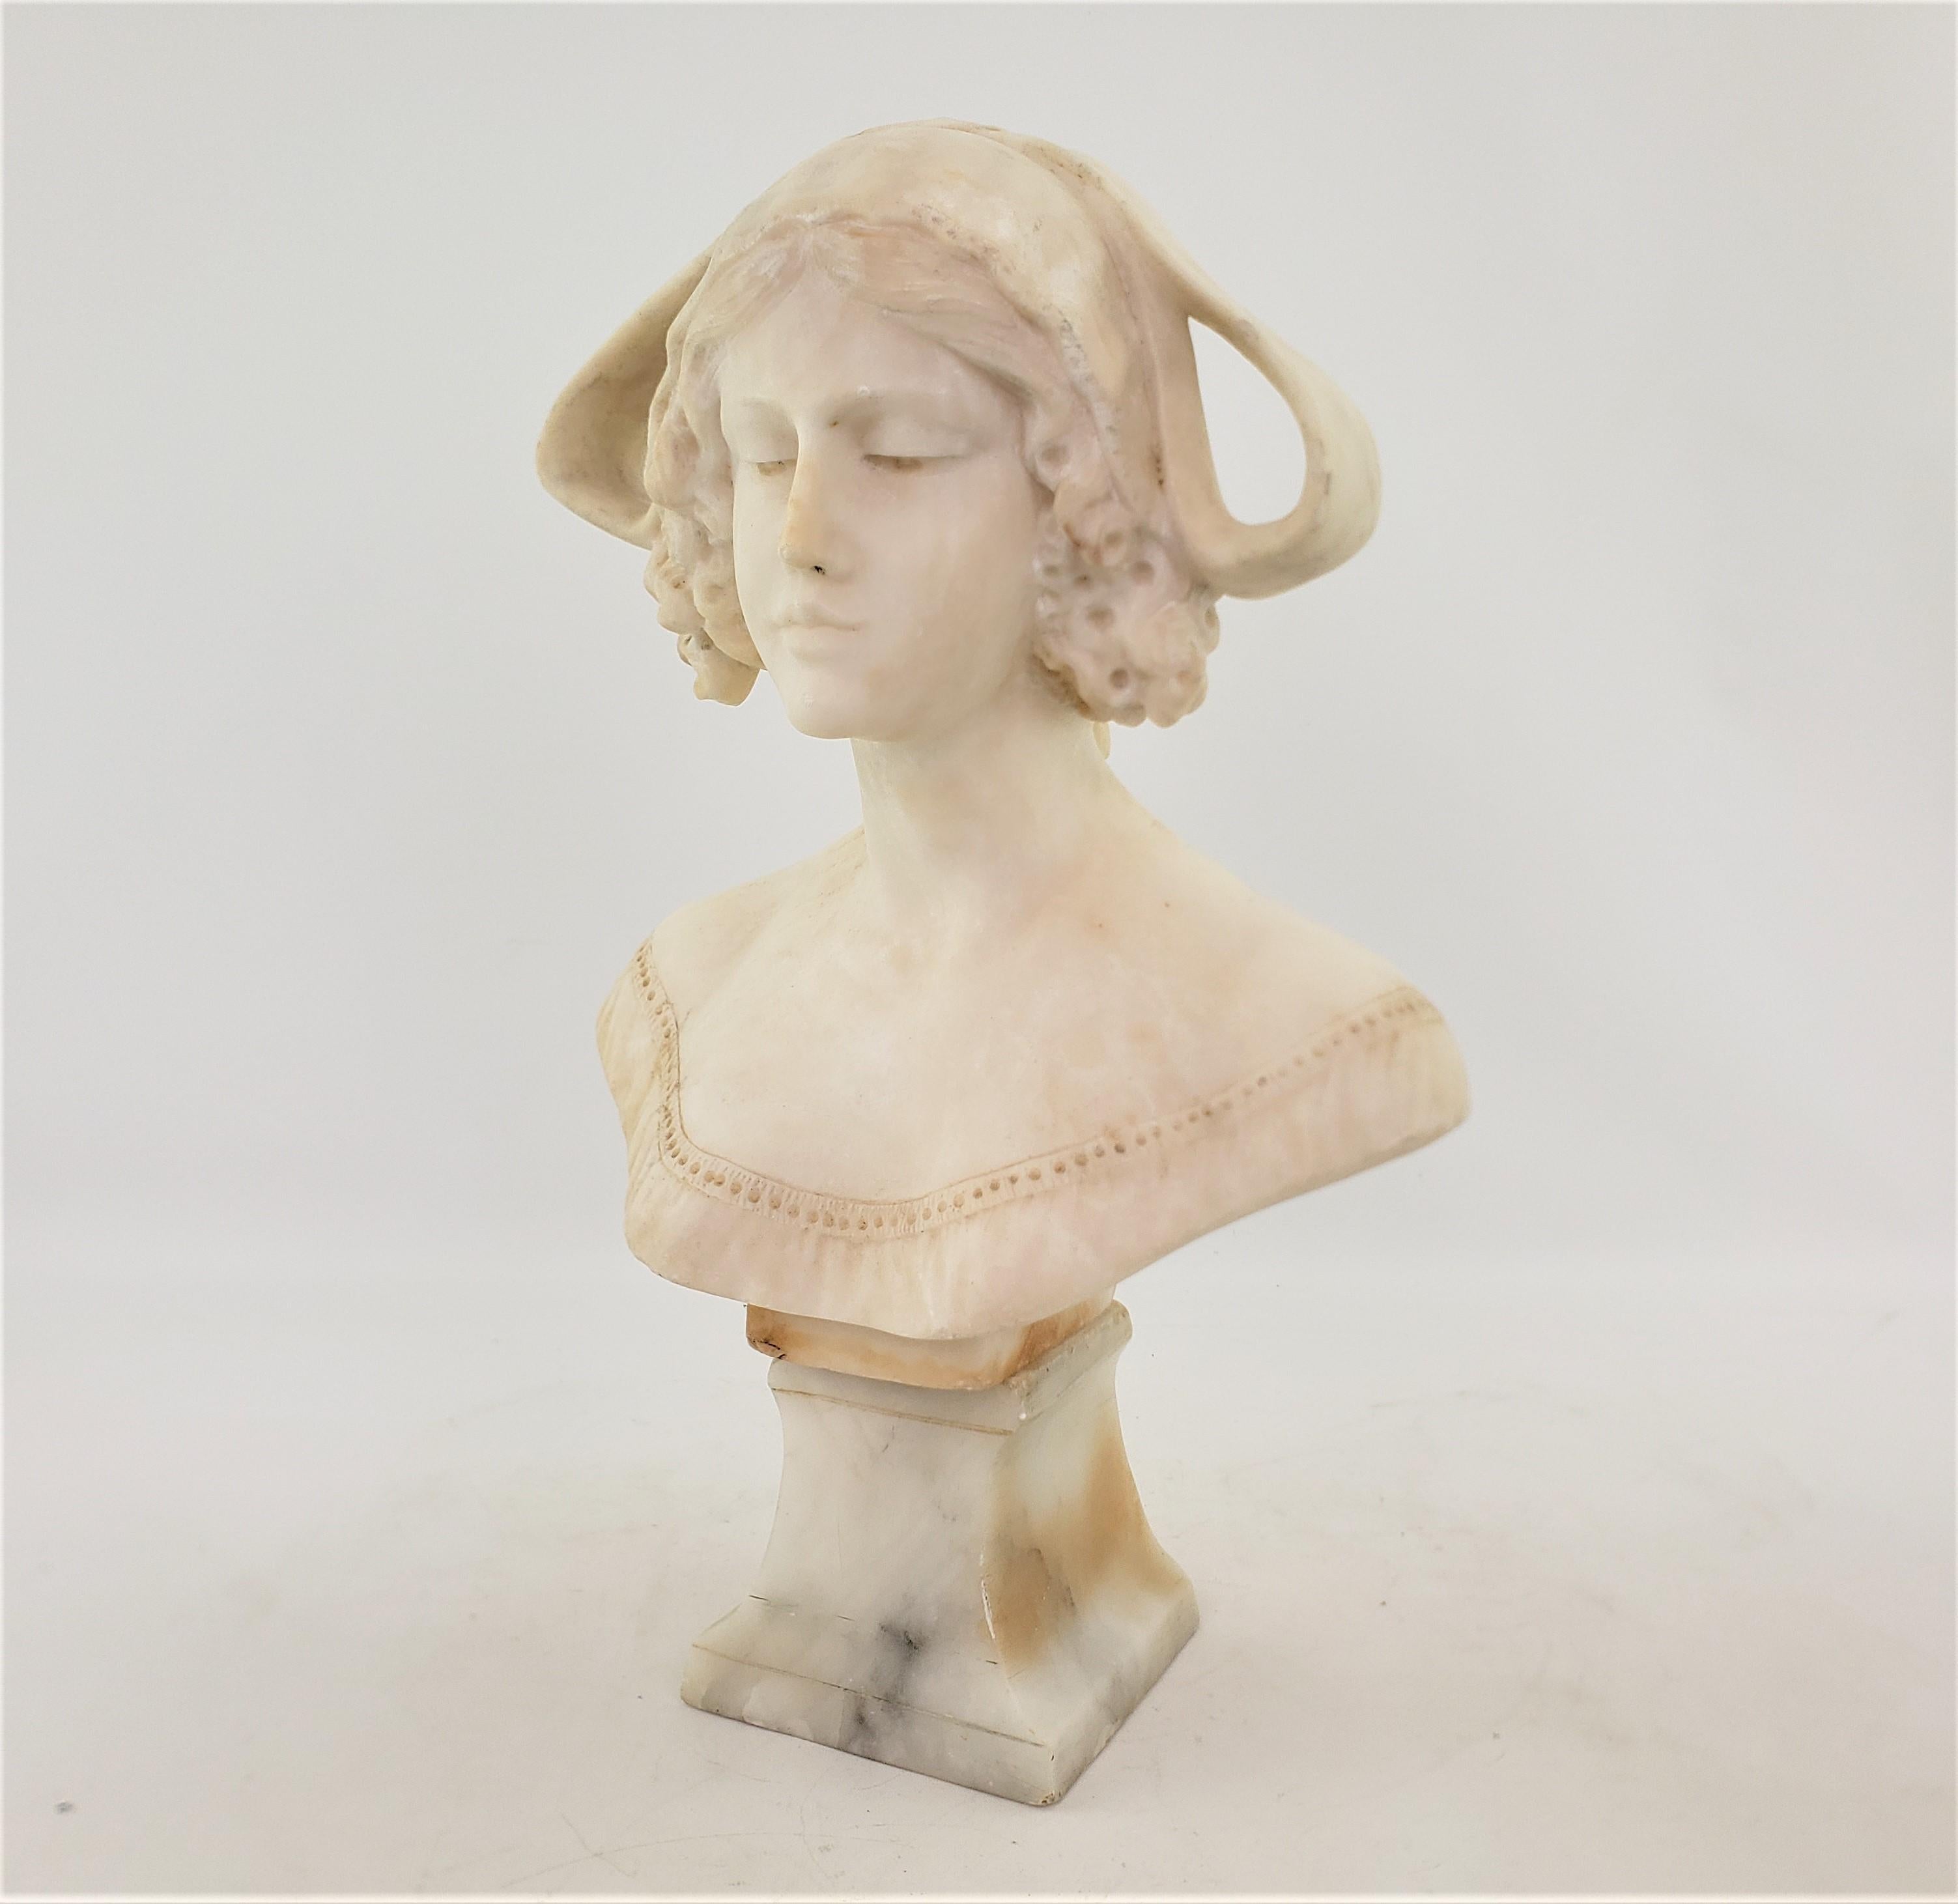 This antique bust or figurative sculpture is unsigned by the artist, but is identified as originating from Italy and dates to approximately 1920 and done in the period Art Deco style. The bust and base are composed of solid hand-carved alabaster and